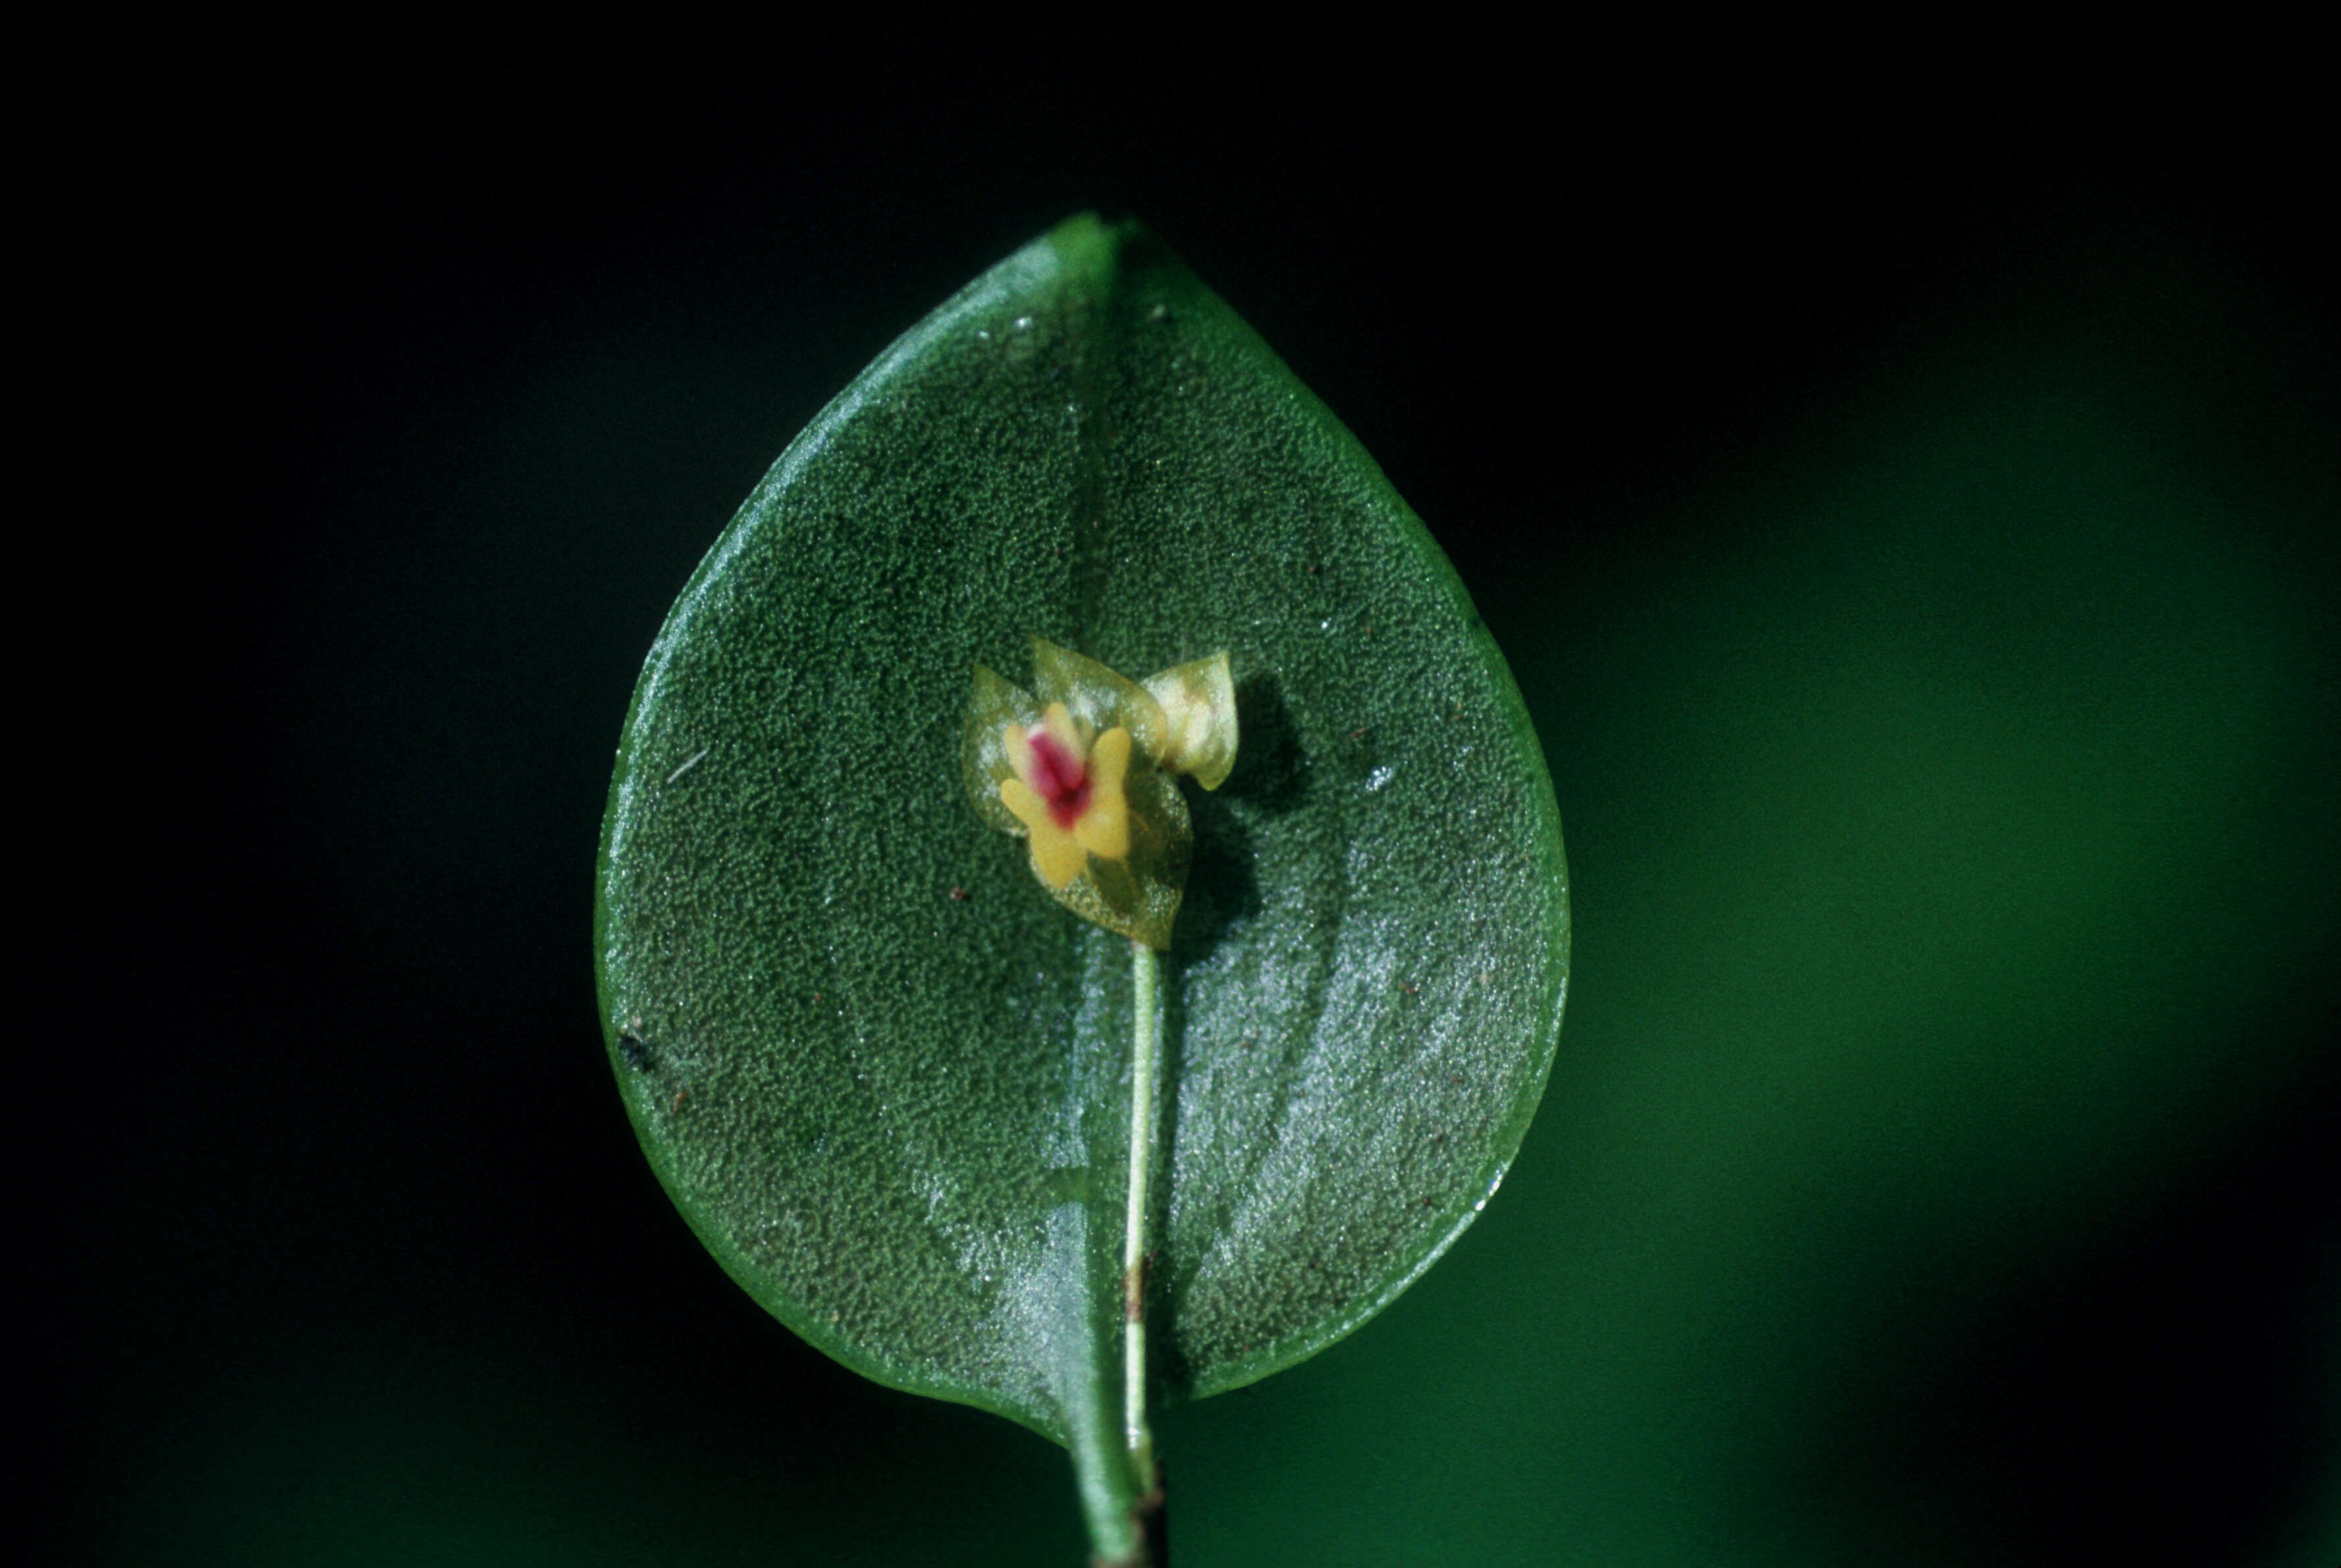 Image of Puerto Rico babyboot orchid